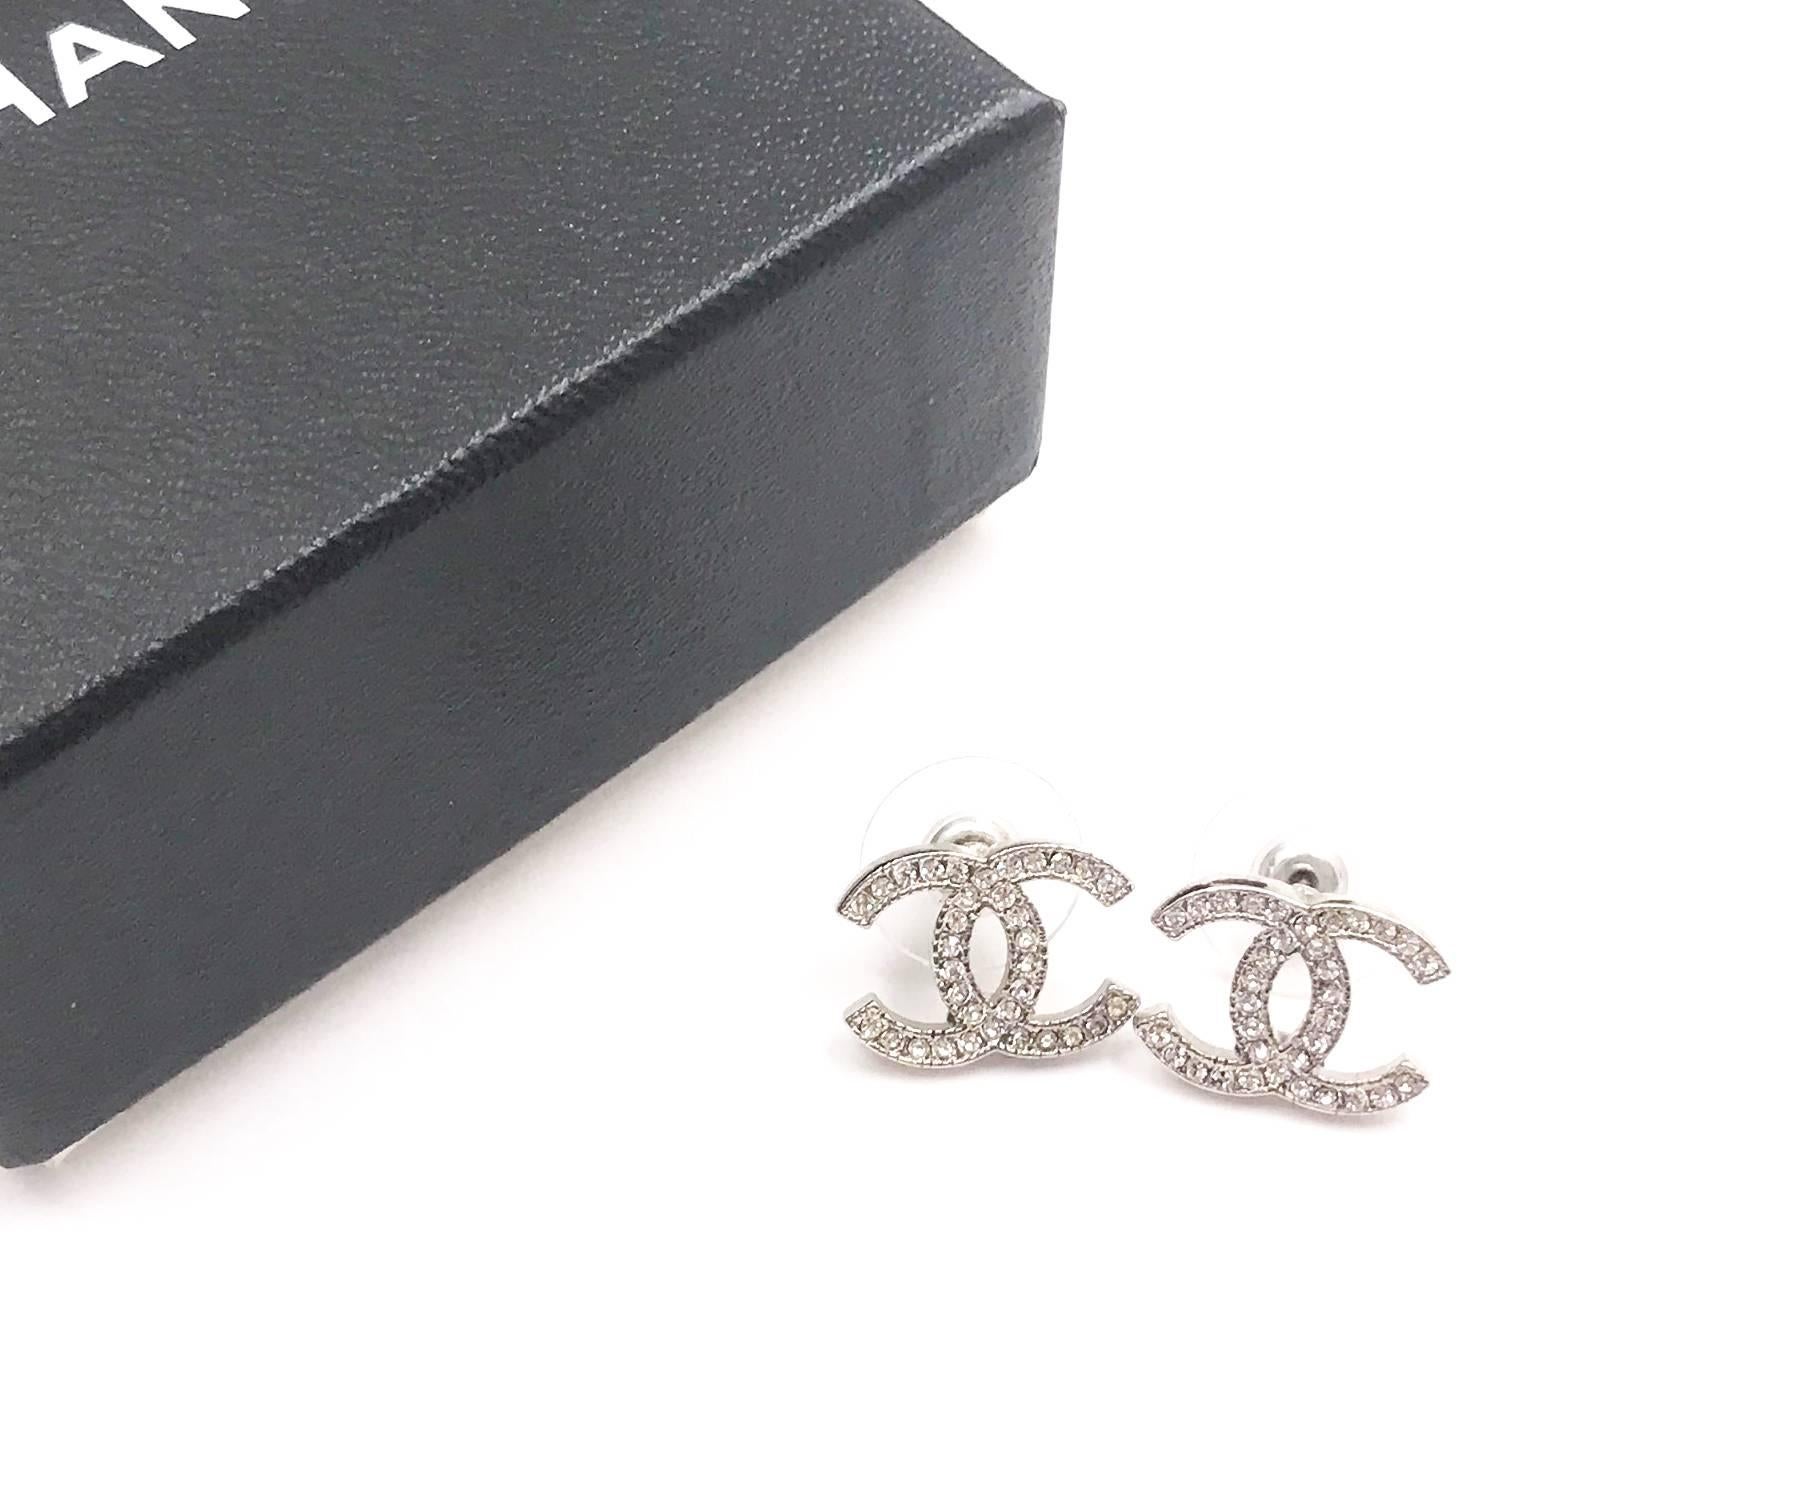 Chanel Classic Silver CC Crystal Moscova Piercing Earrings

* Marked 11
*Made in France
*Comes with the original box

- Approximately 0.6